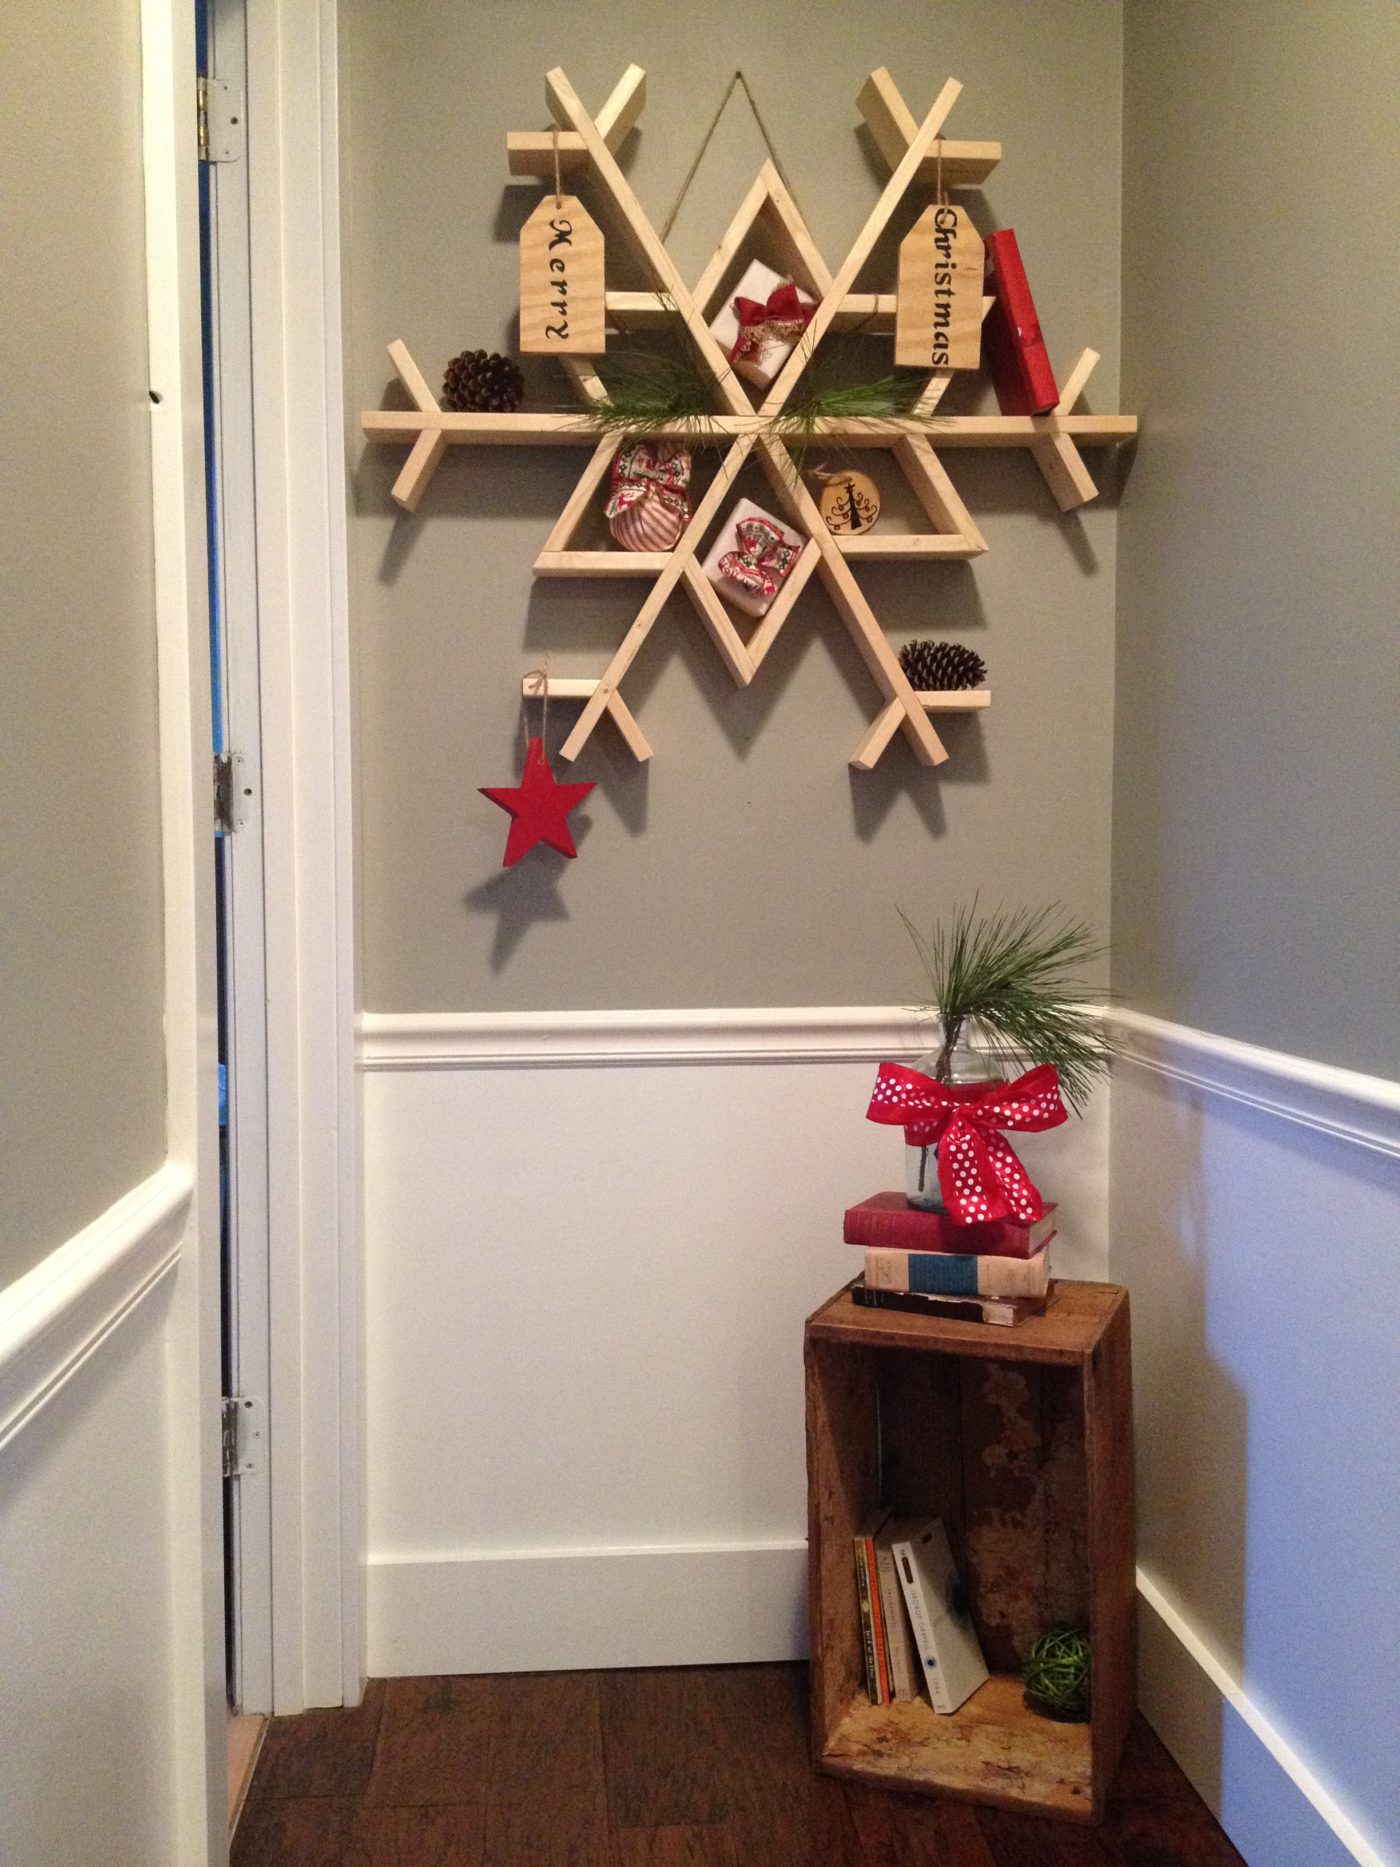 Large DIY snowflake shelf wall decor made from 1x4 boards